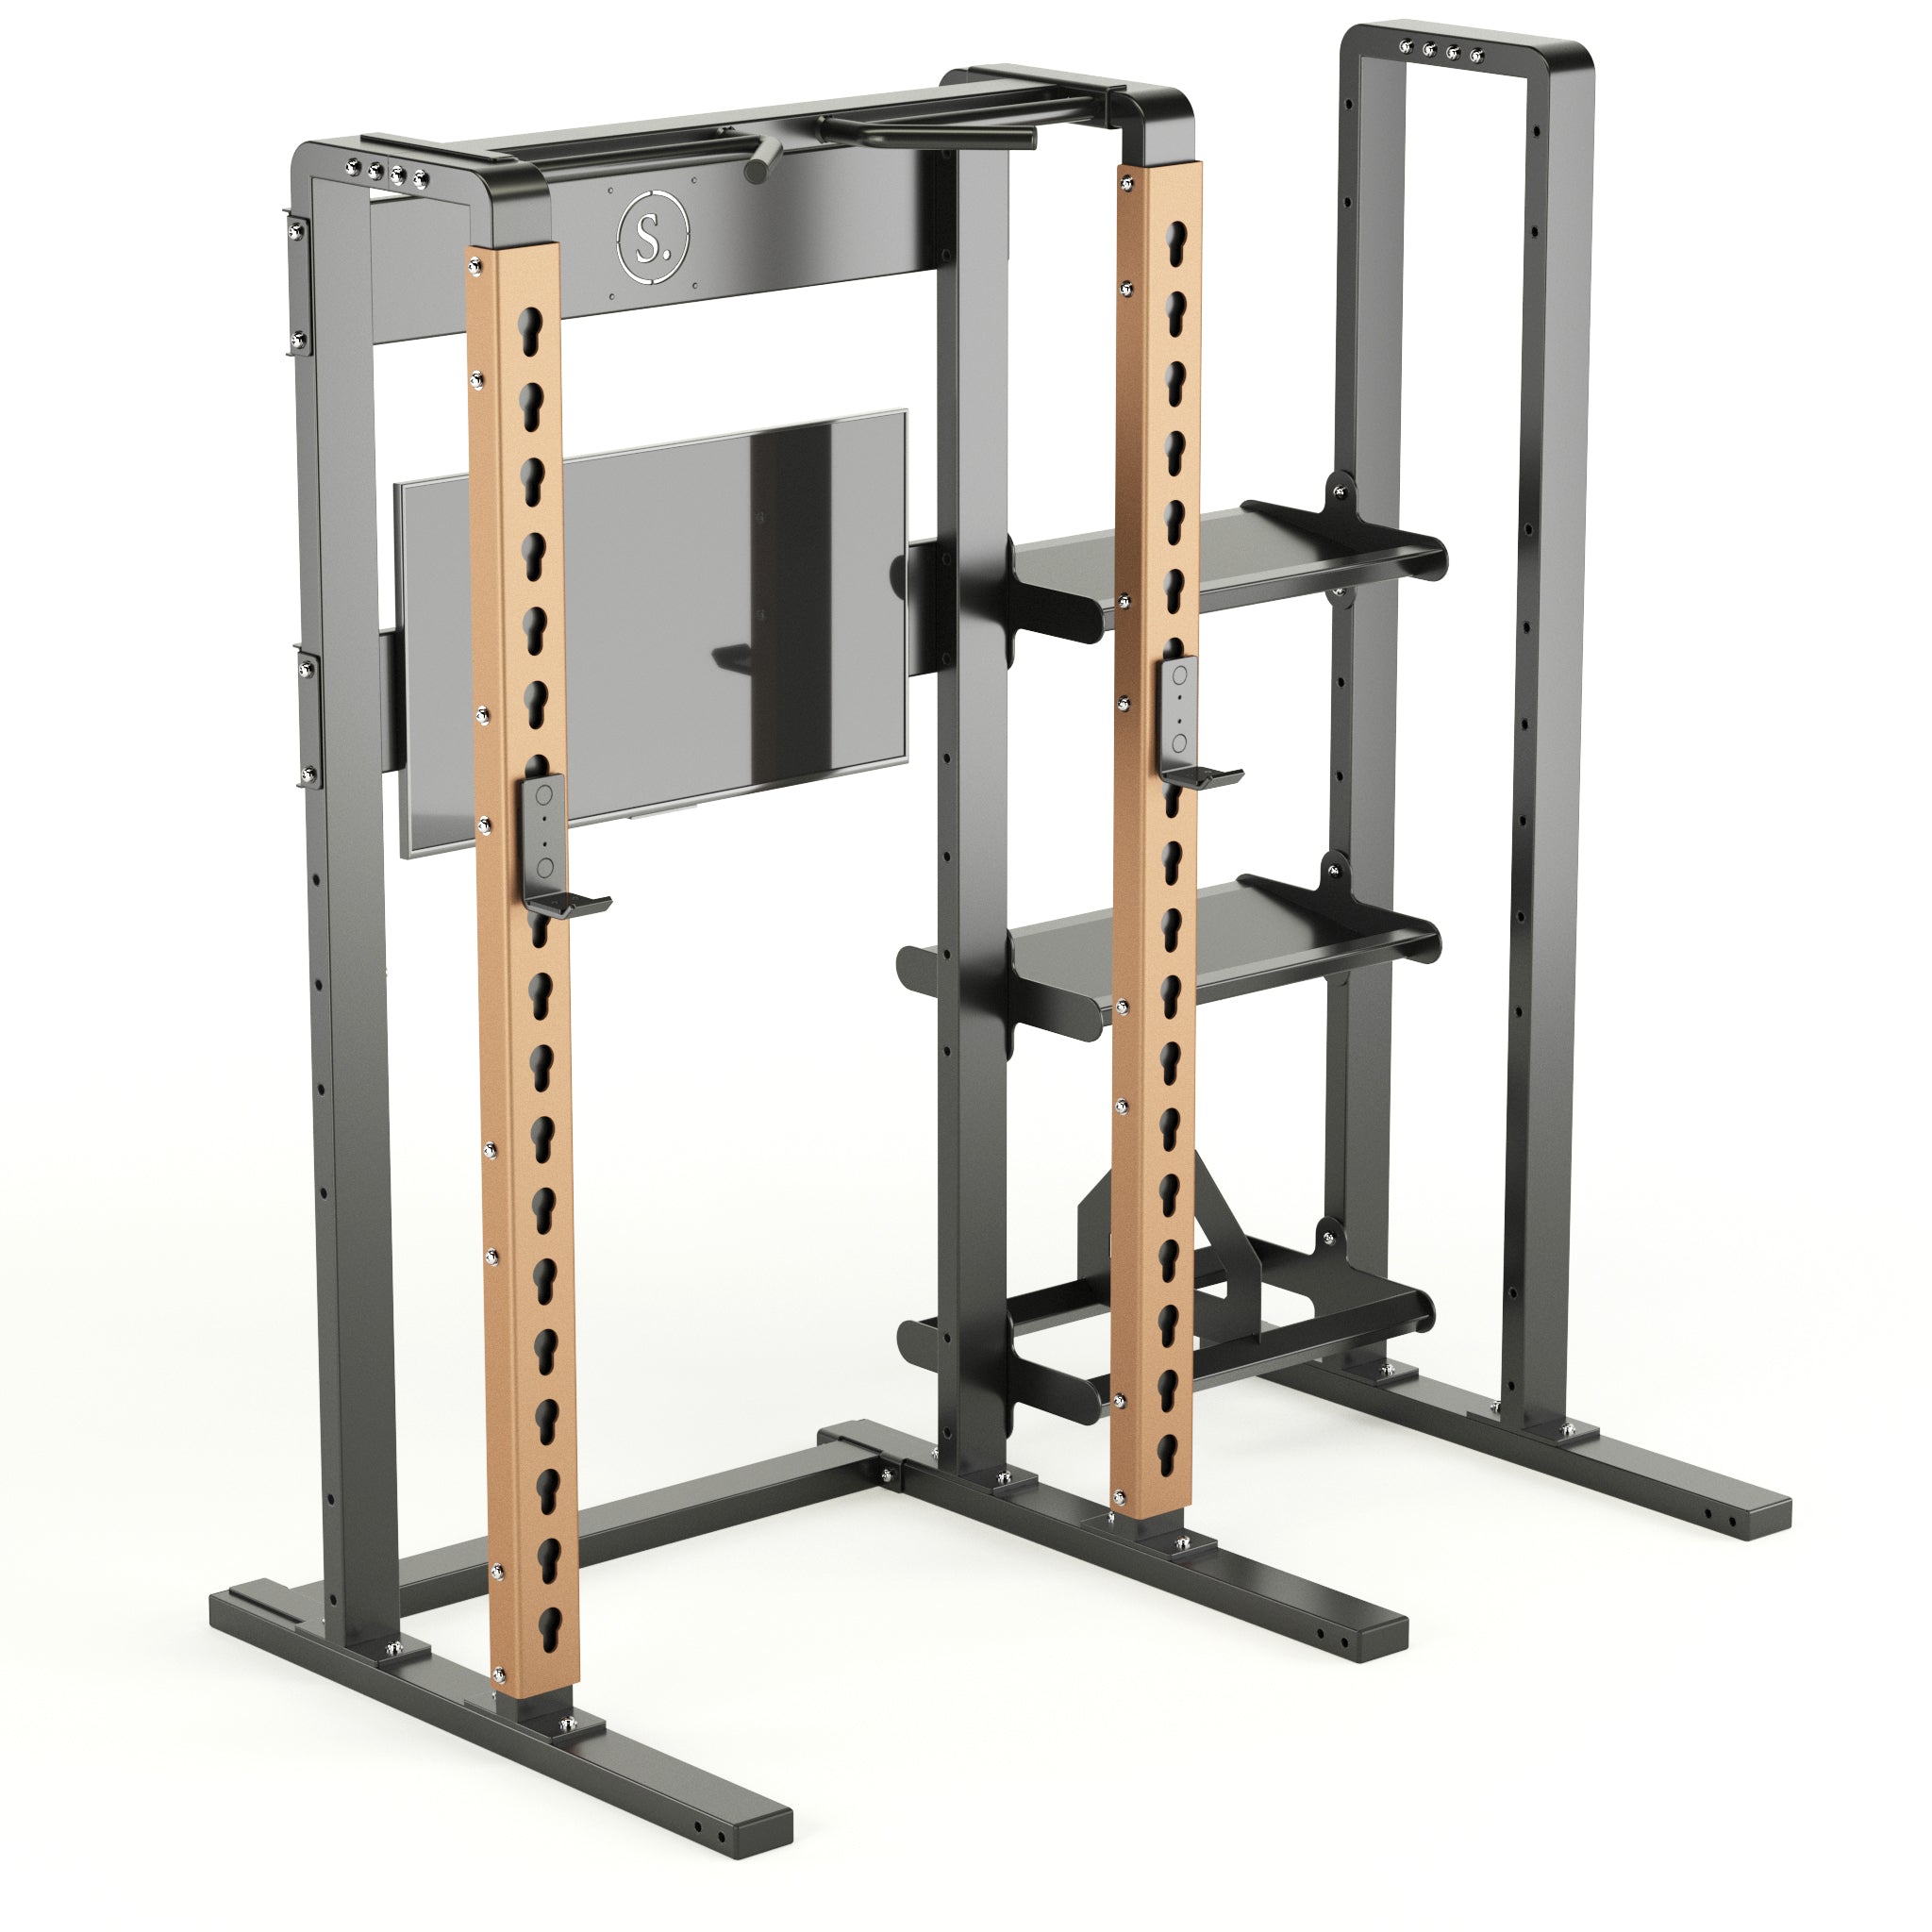 Solo Half Rack Plus with compact storage in bronze